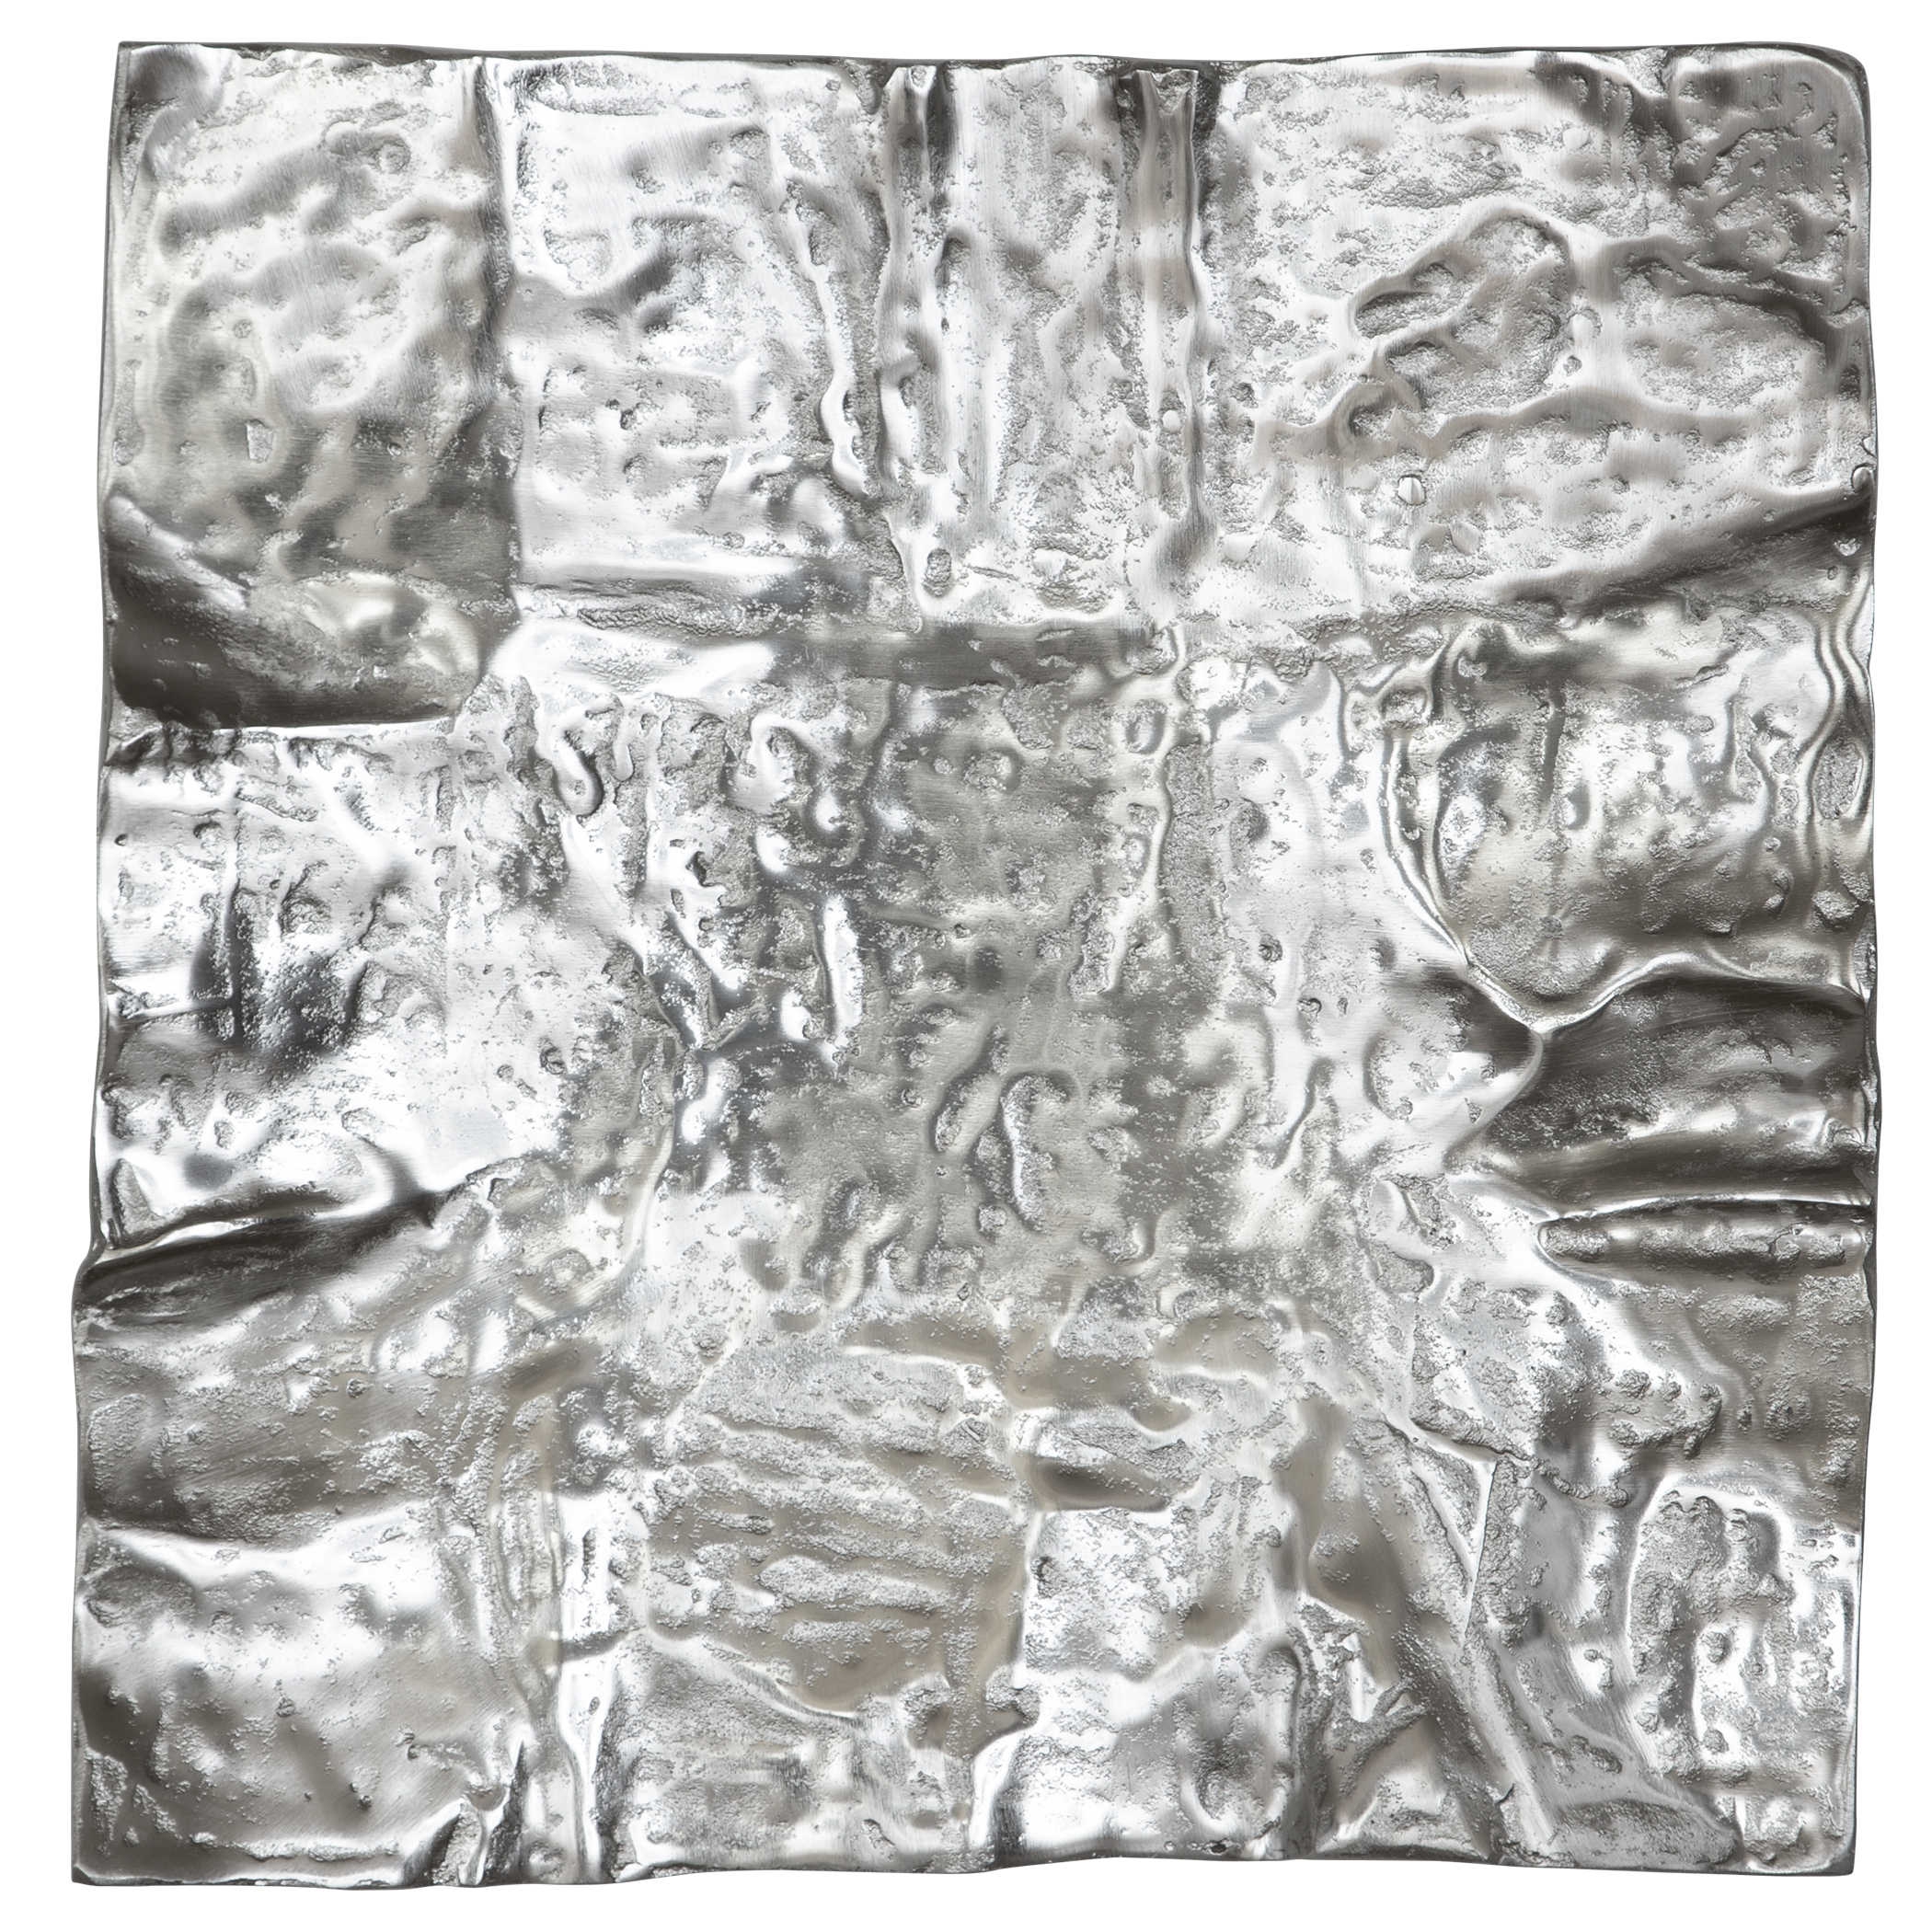 Archive Nickel Wall Decor - Image 6